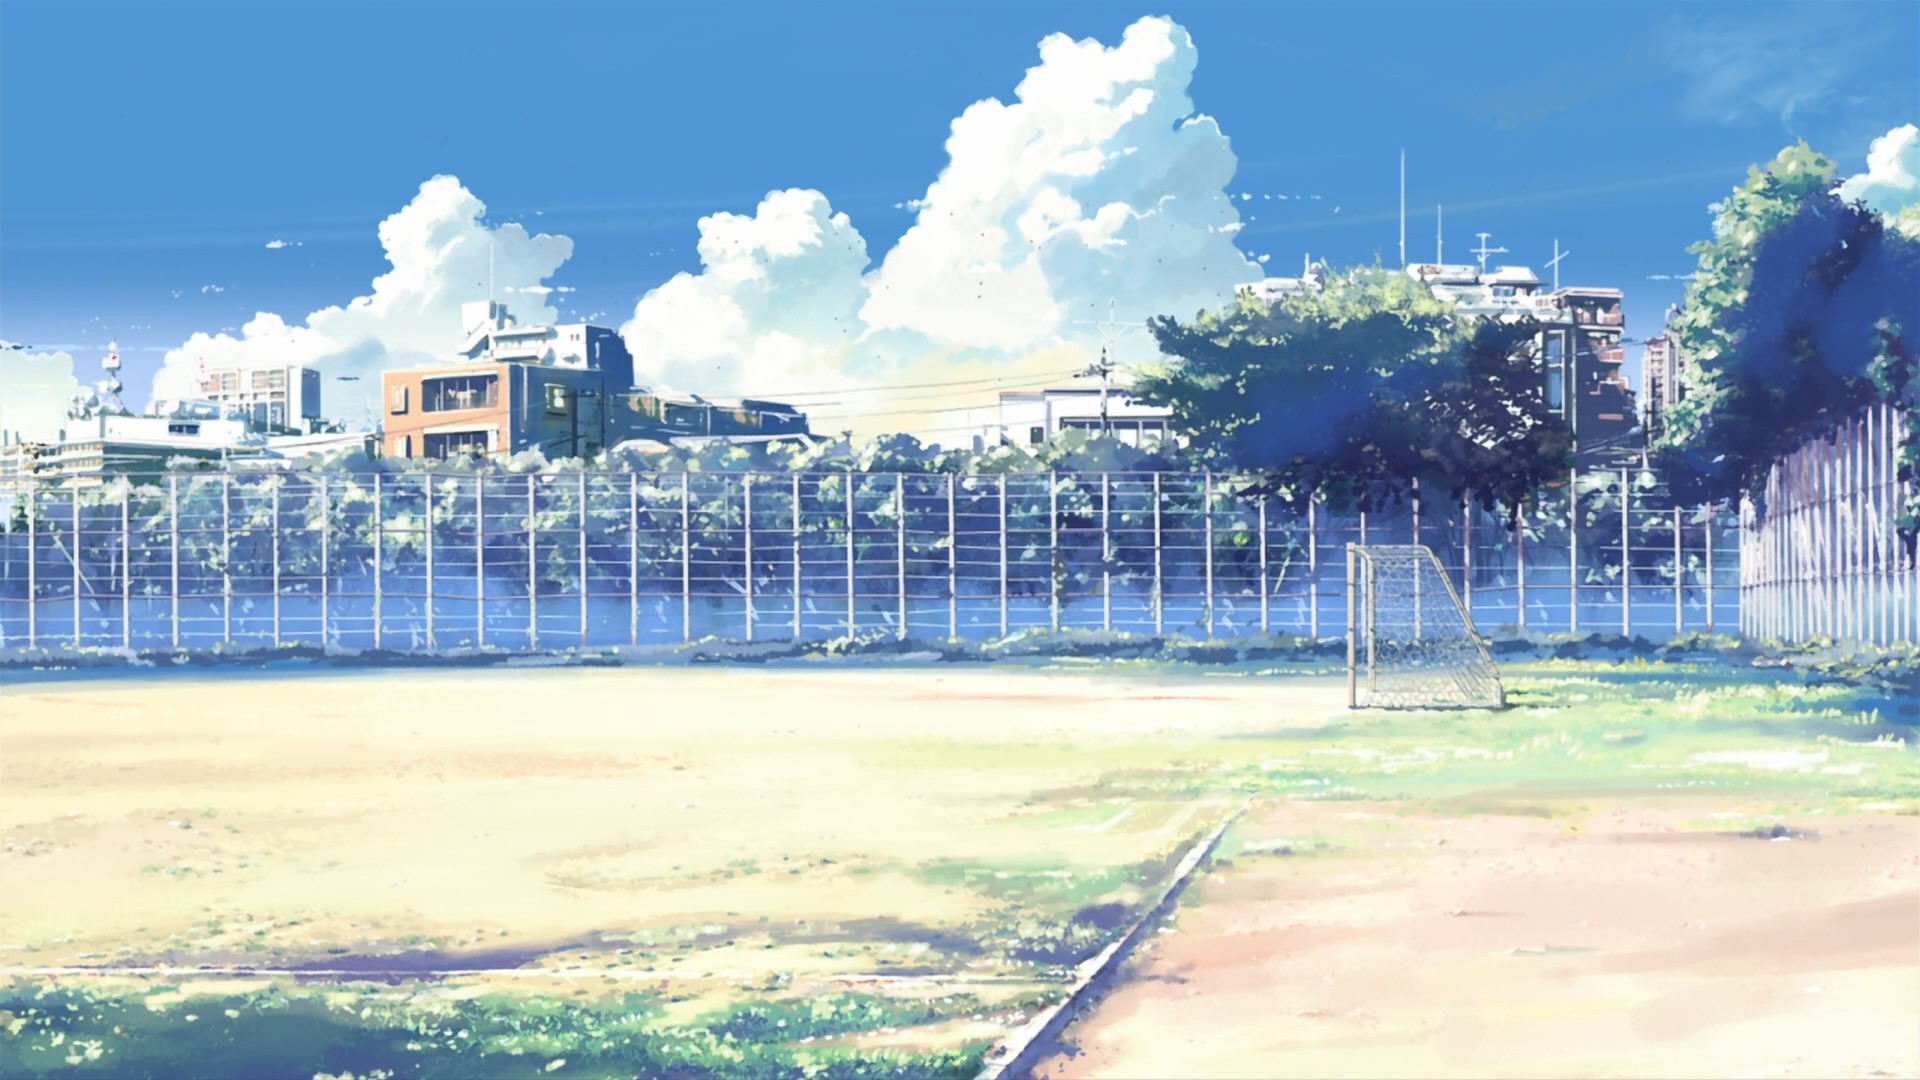 Anime School background ·① Download free cool backgrounds ...